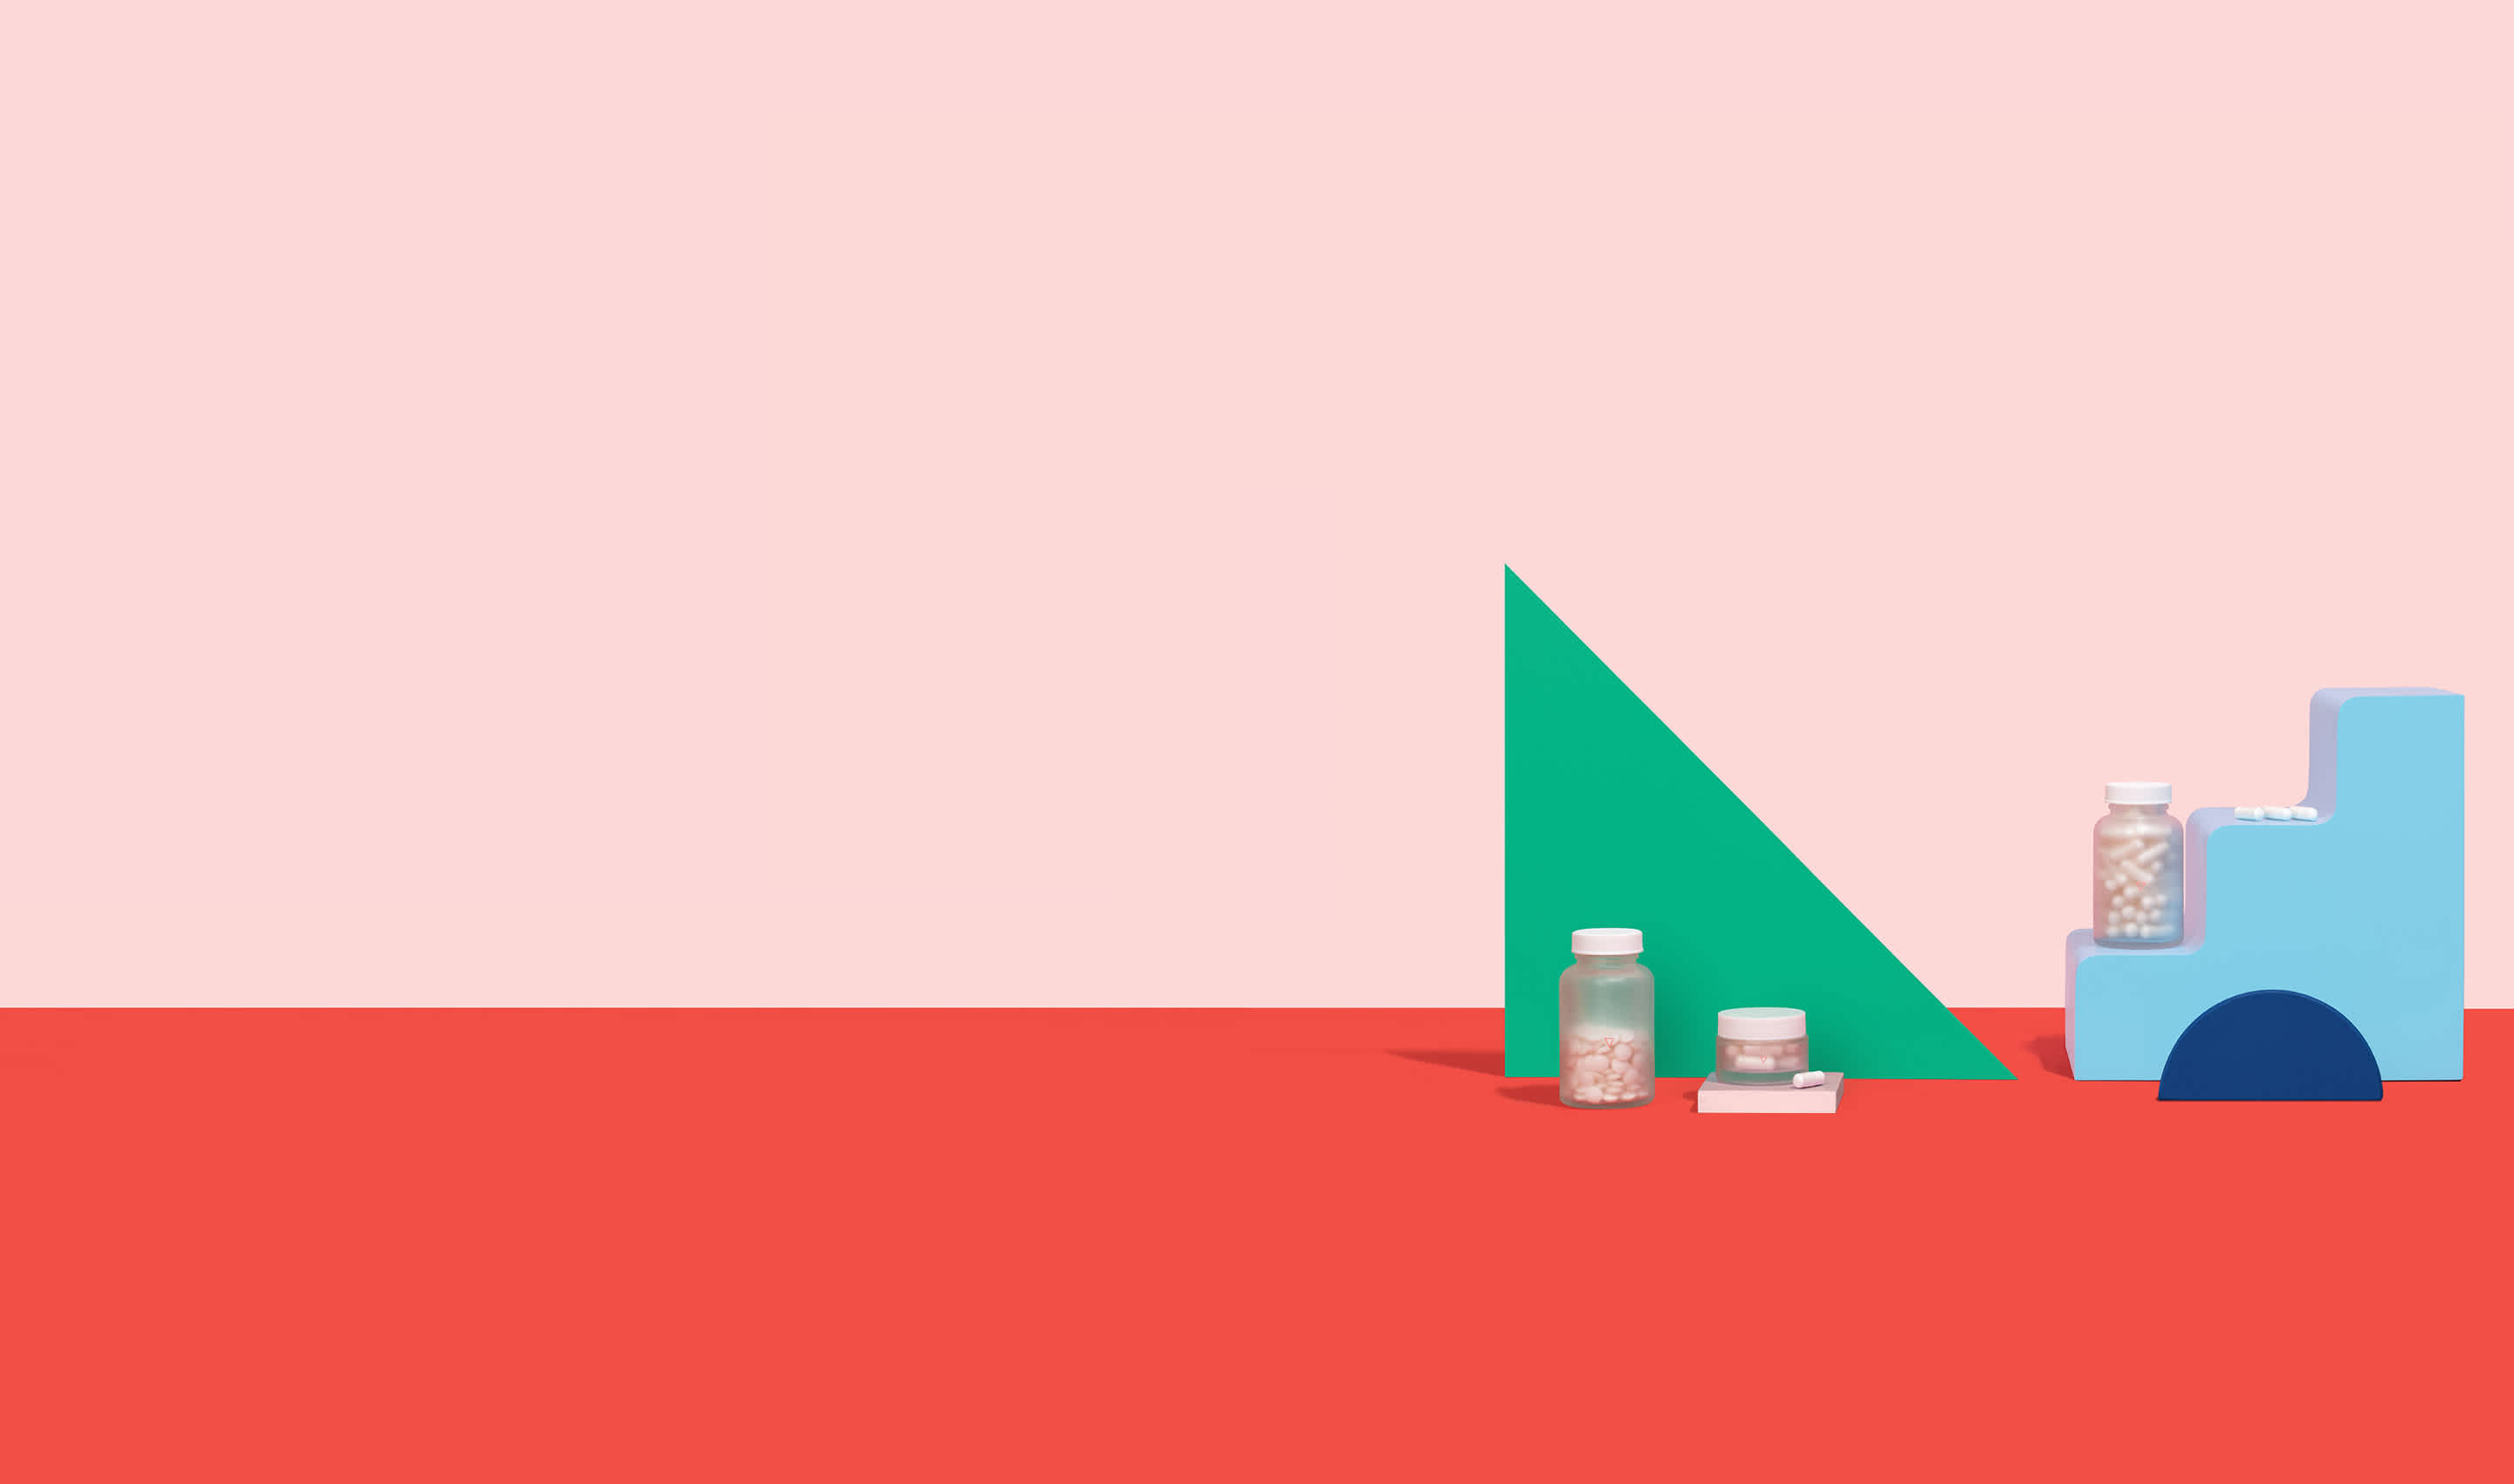 A collection of genital care supplements and medications balanced on colorful geometric shapes.